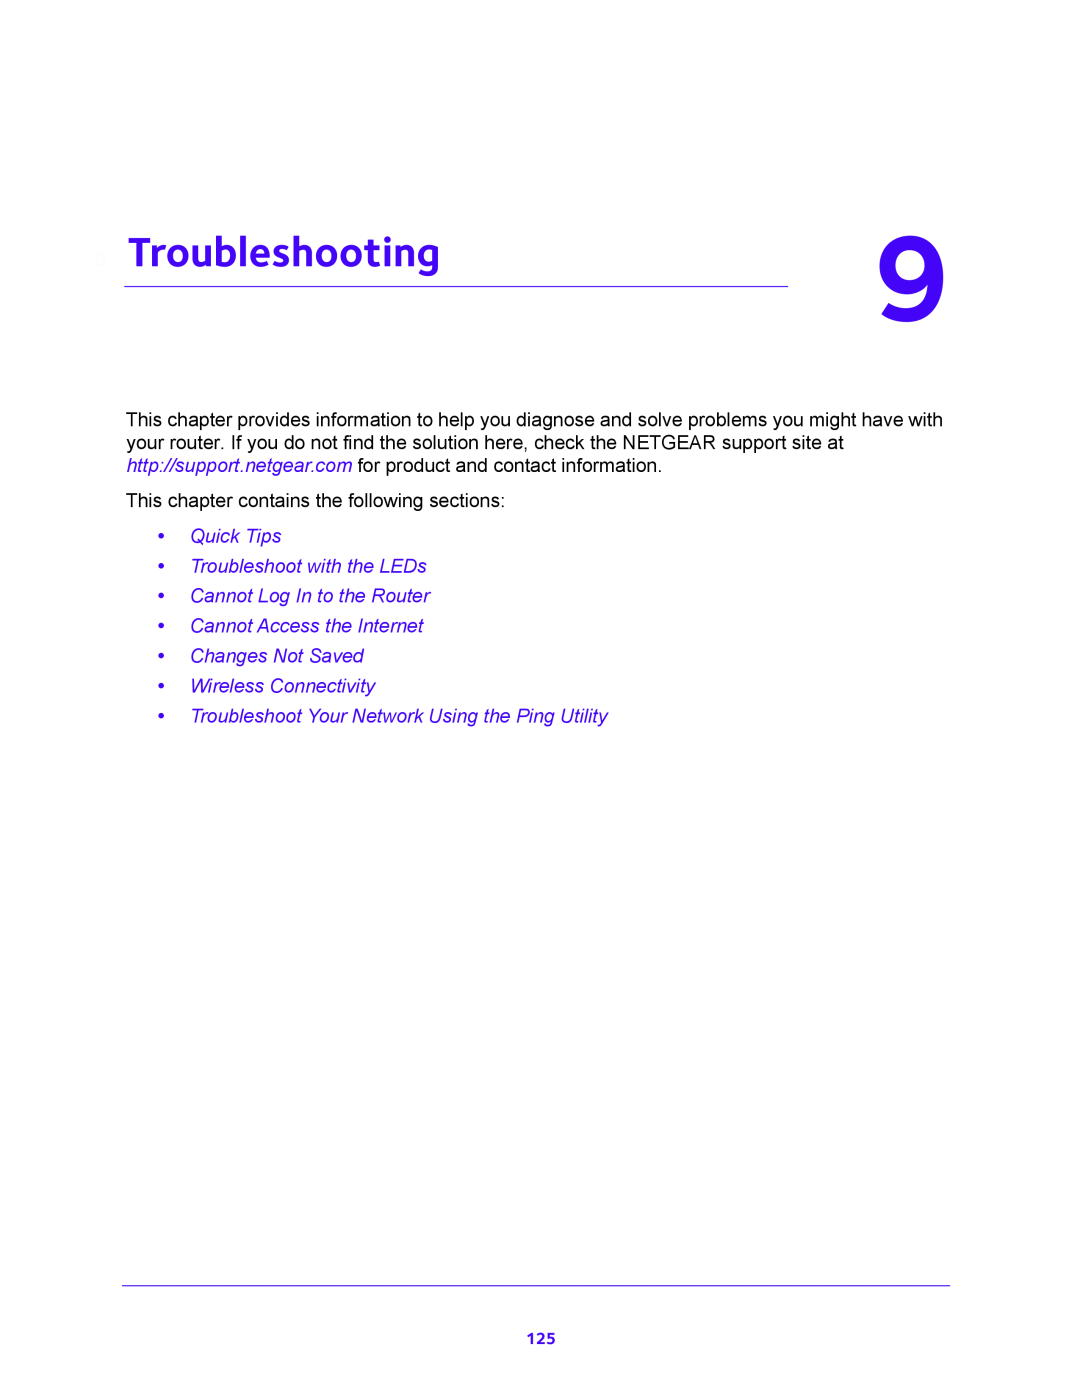 NETGEAR WNR200v4 user manual Troubleshooting, Quick Tips Troubleshoot with the LEDs Cannot Log In to the Router 